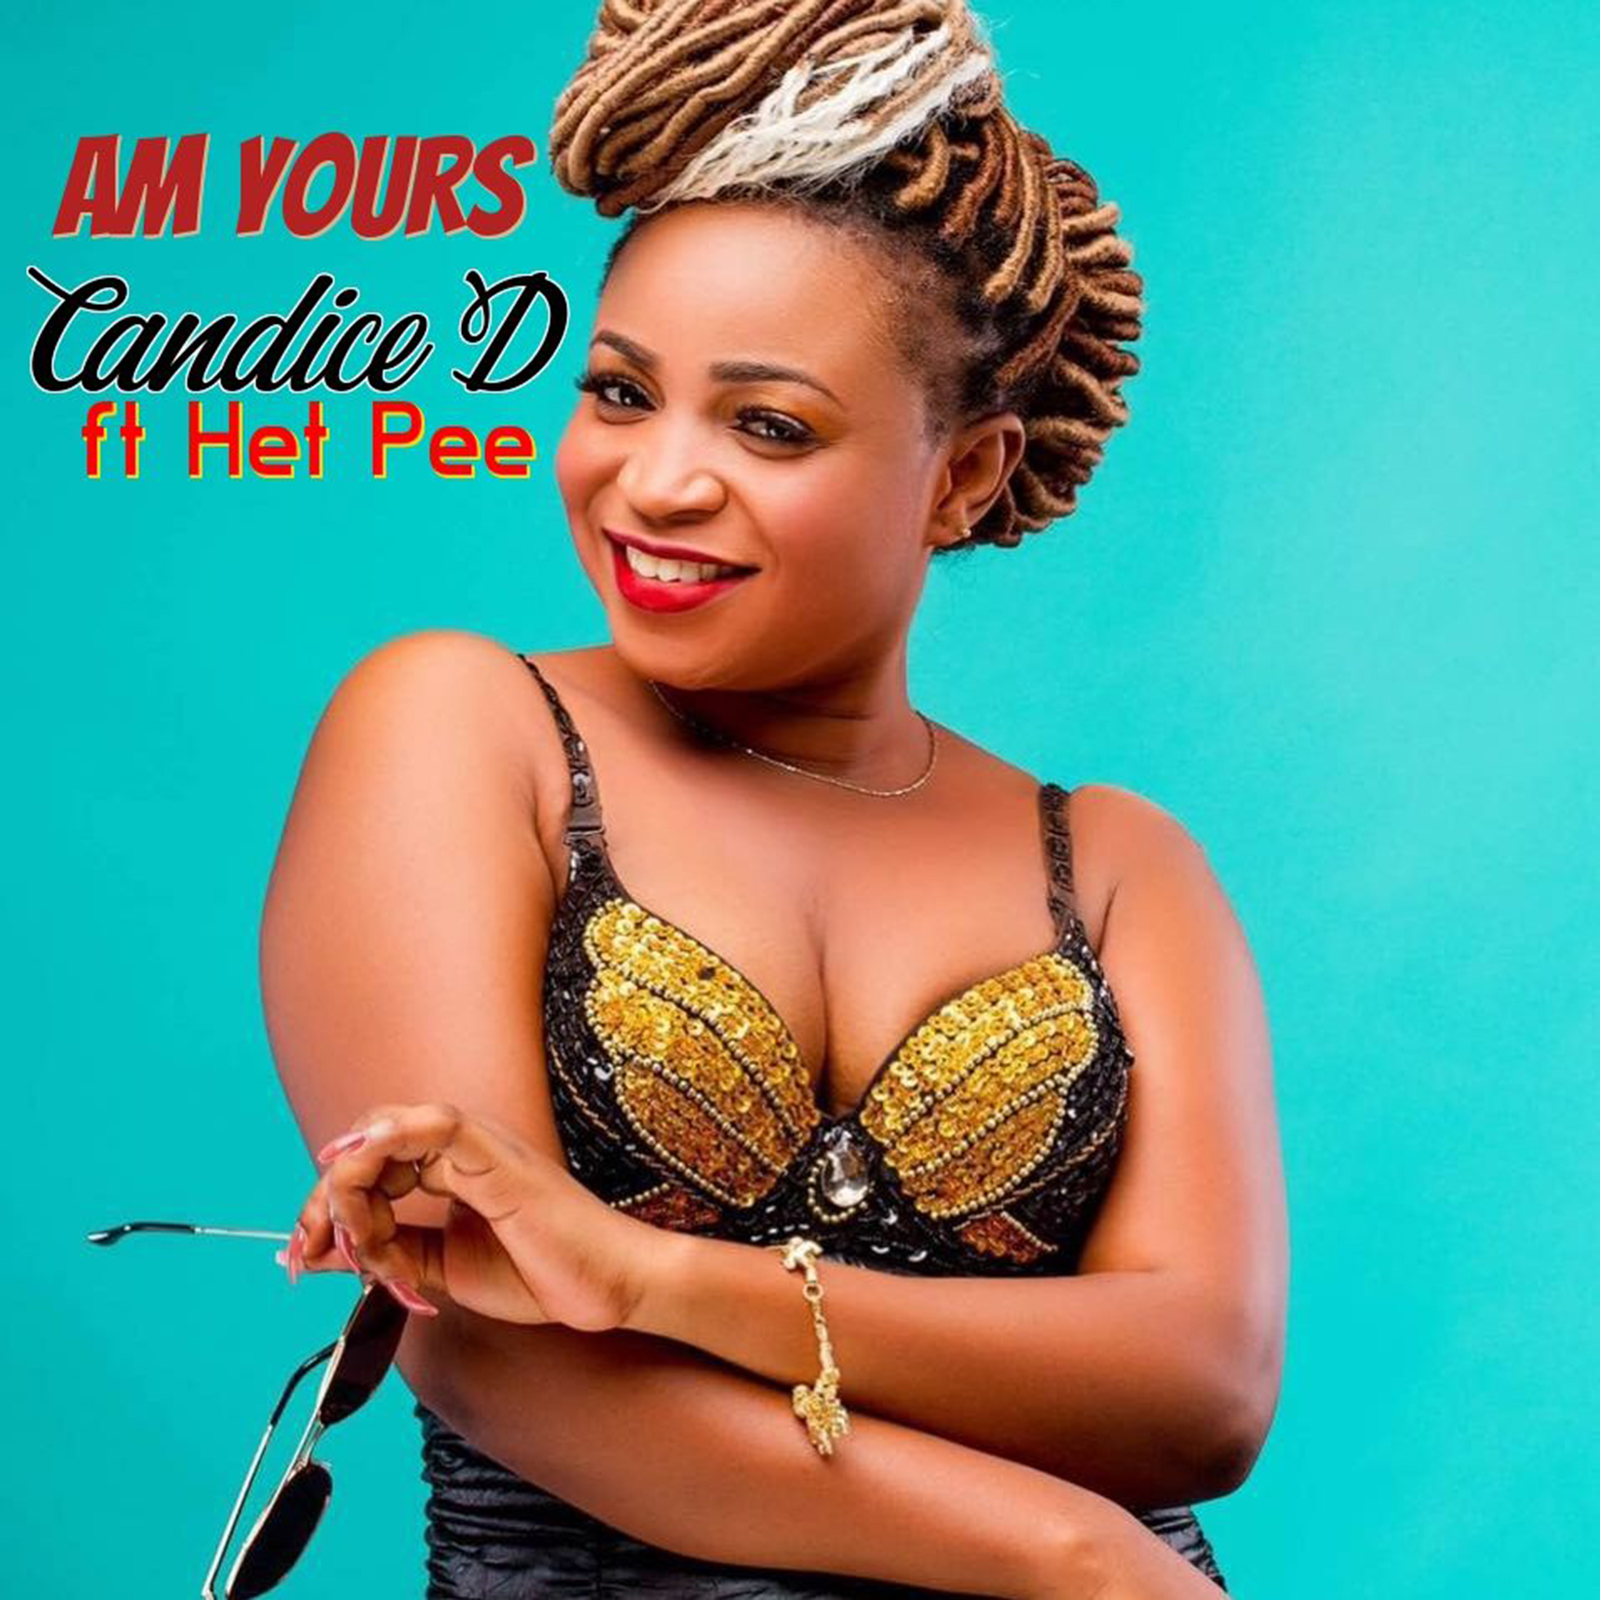 Am Yours by Candice D feat. Het Pee